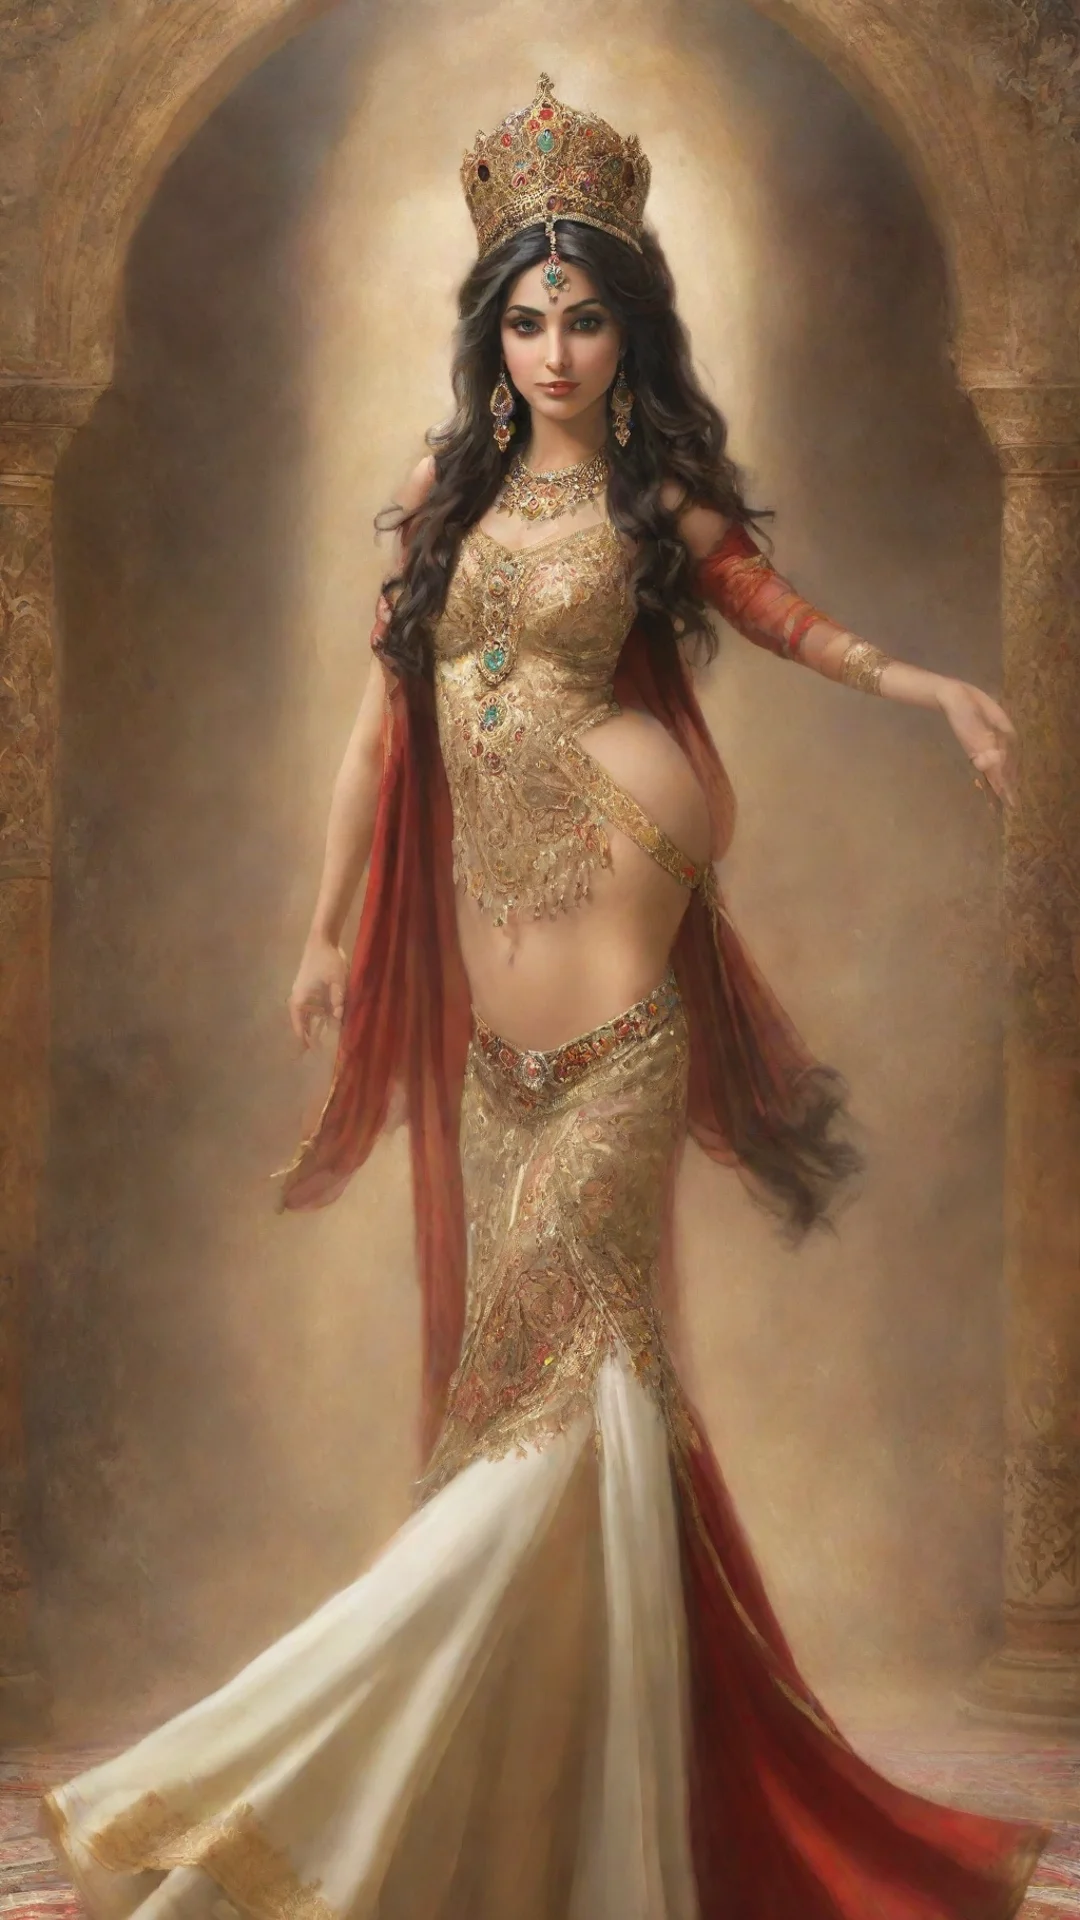 amazing dancing persian queen awesome portrait 2 tall